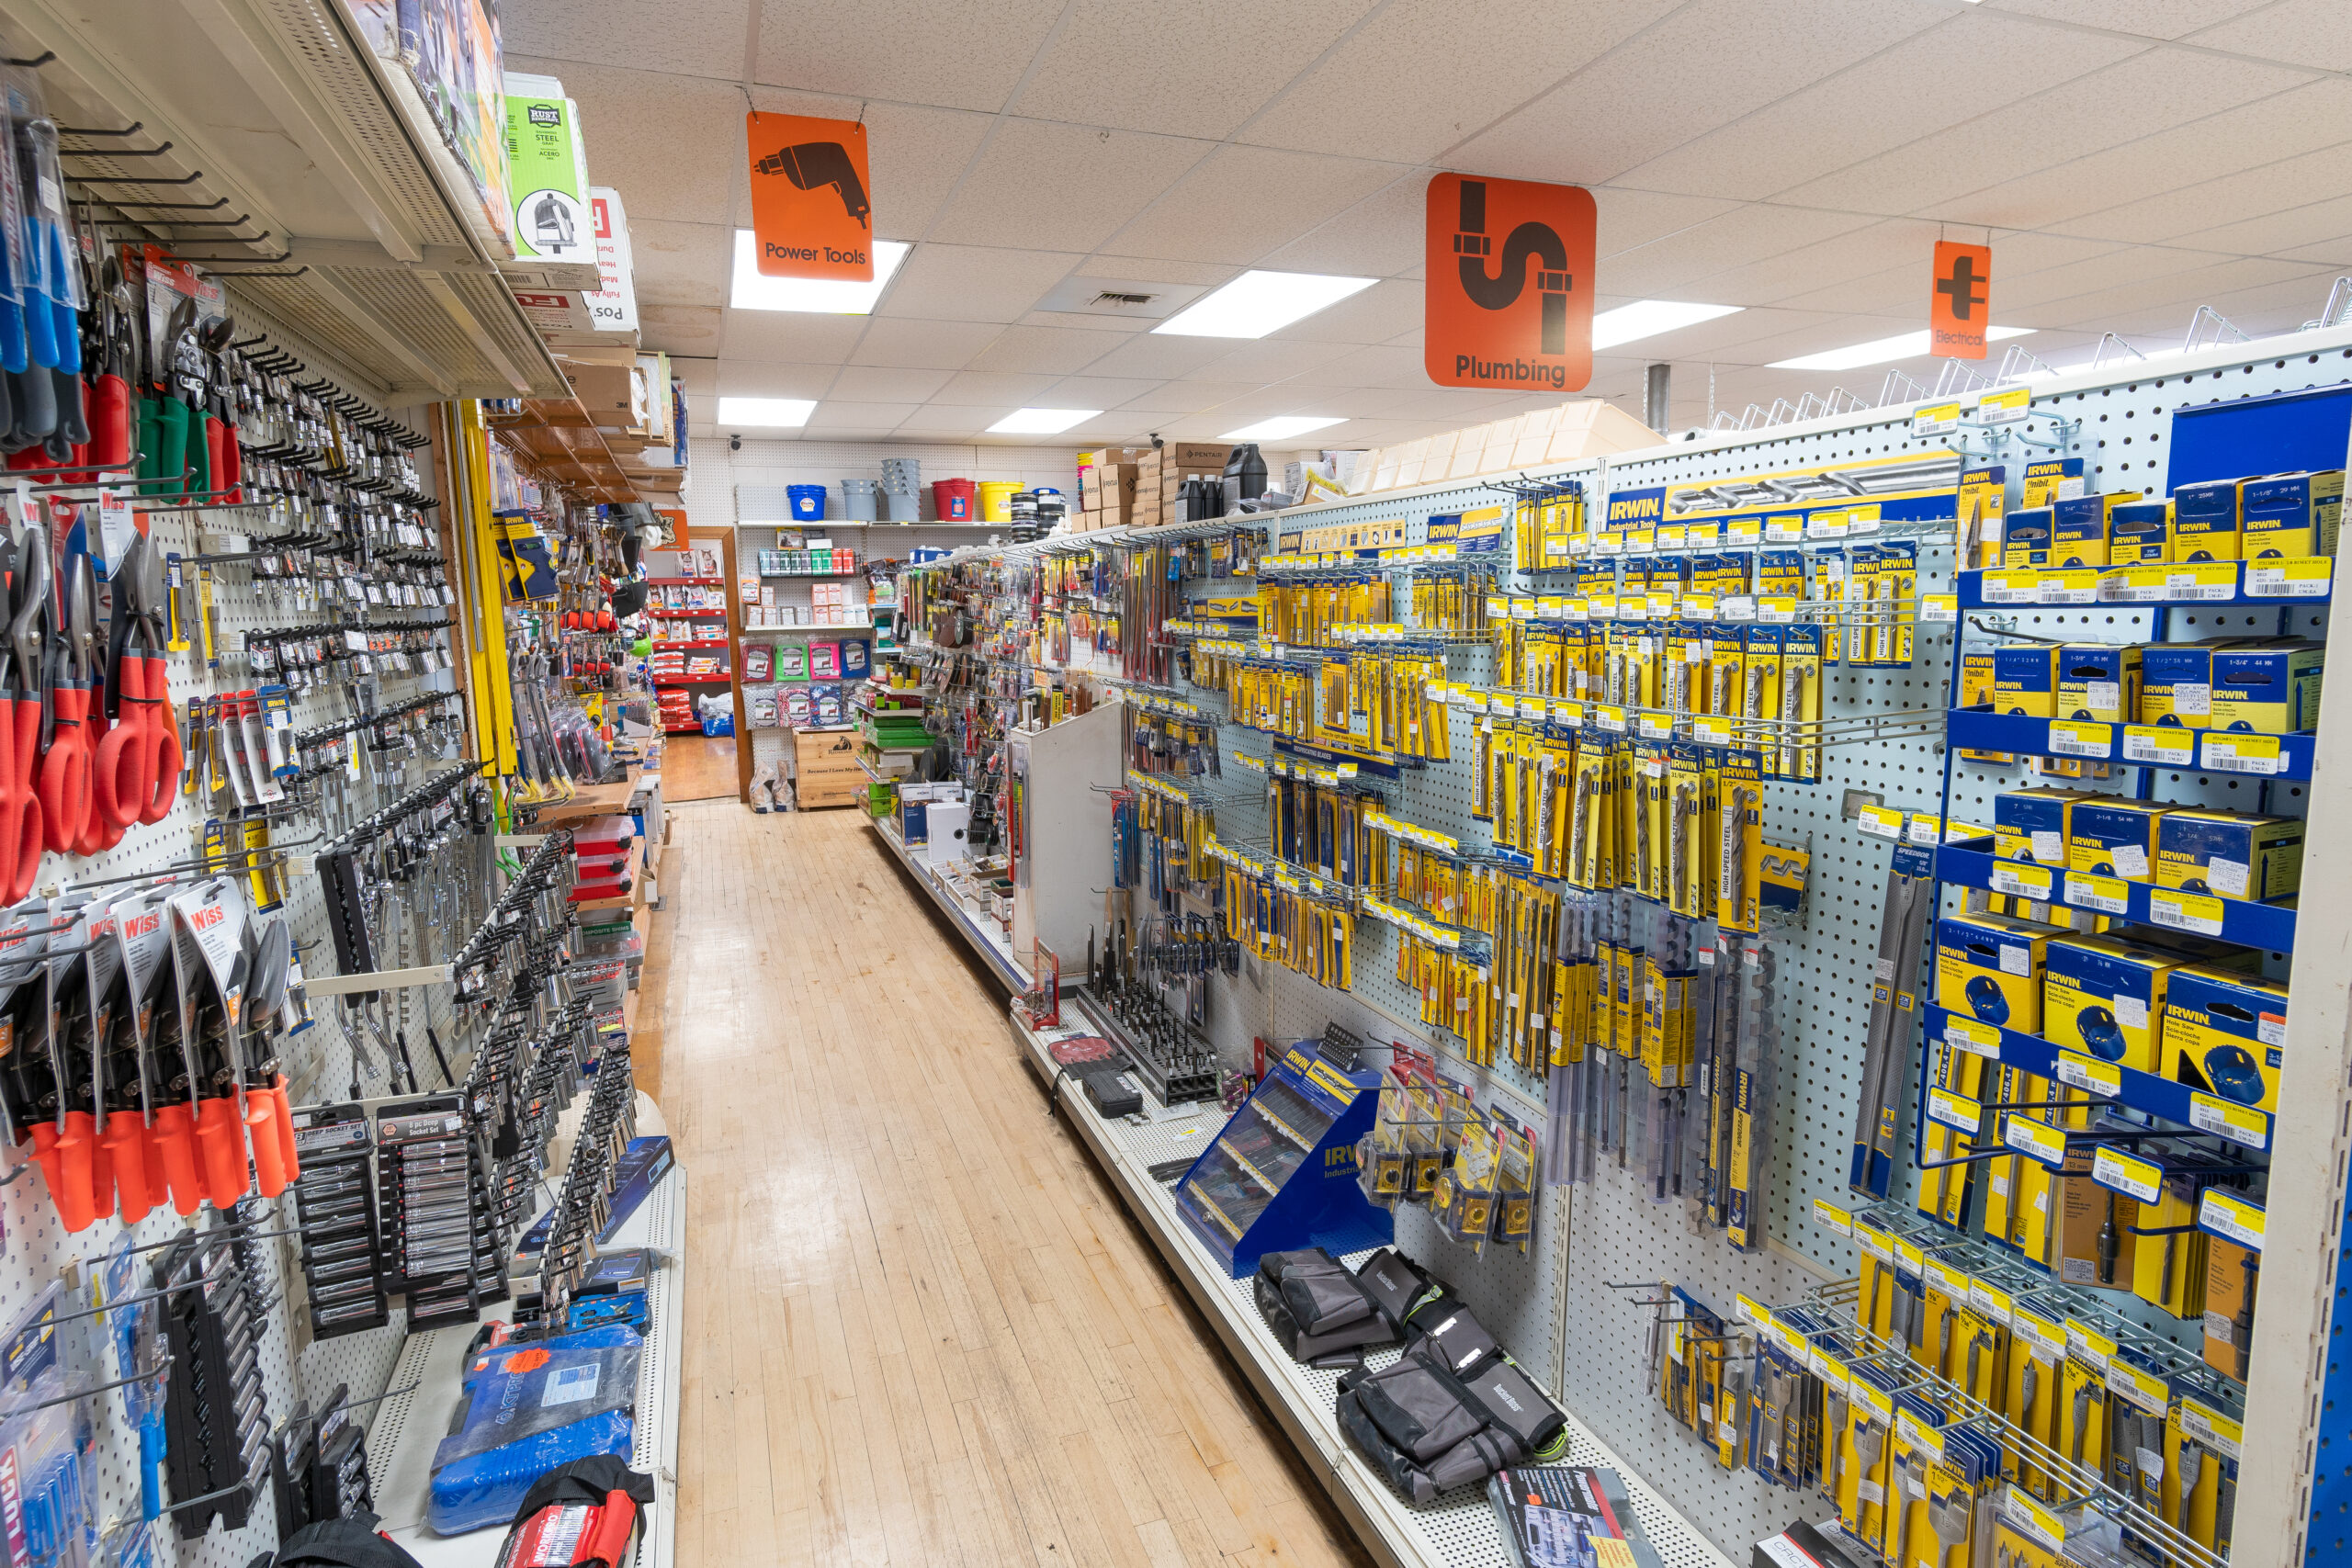 The Tools & Power Tools Aisle at Four Star Supply